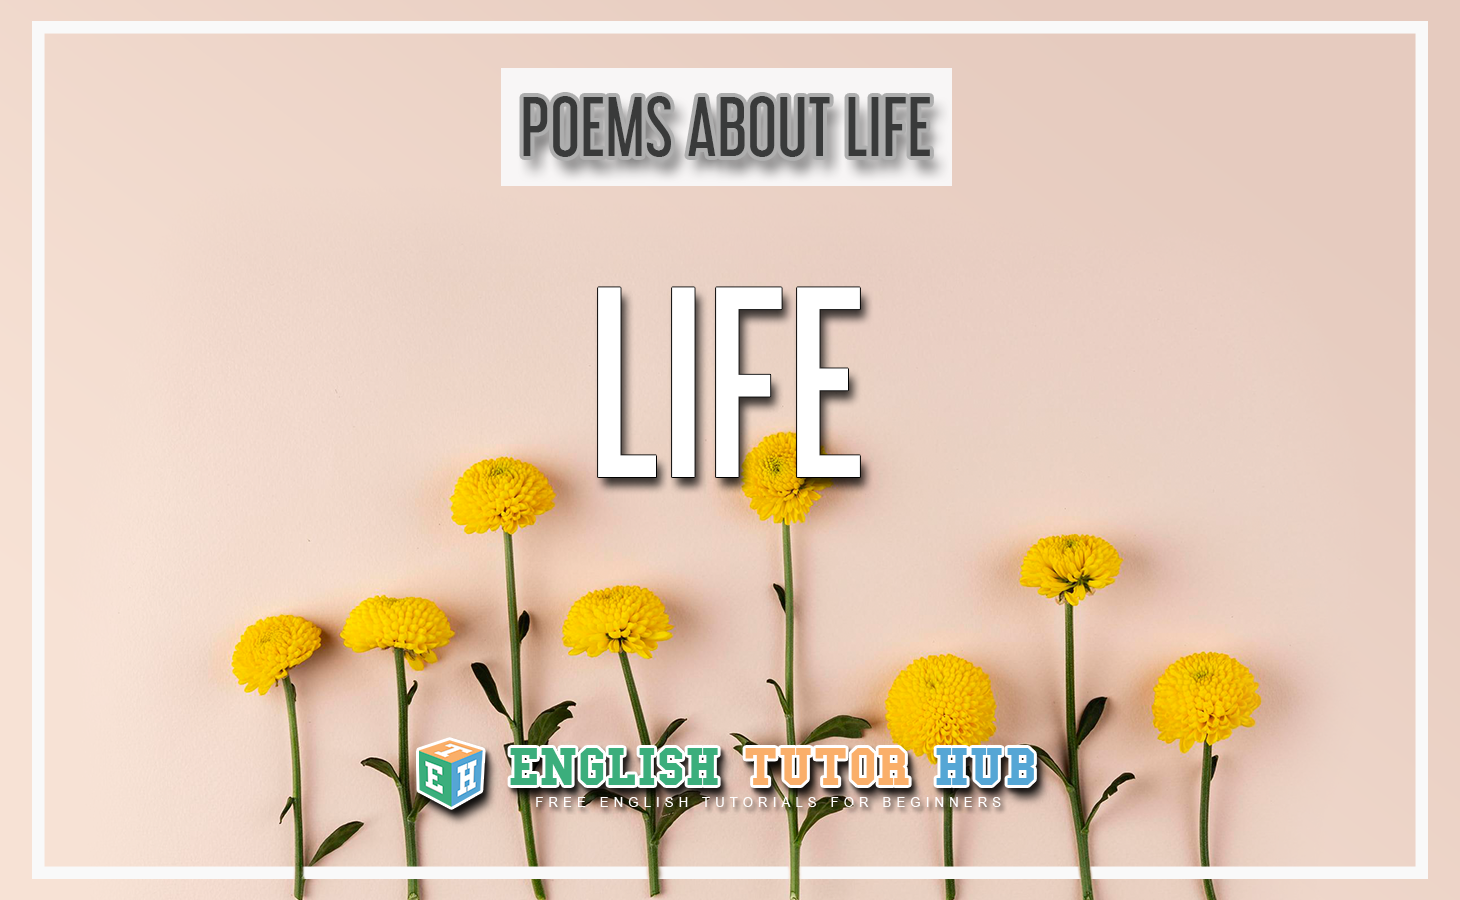 Poems About Life - Life